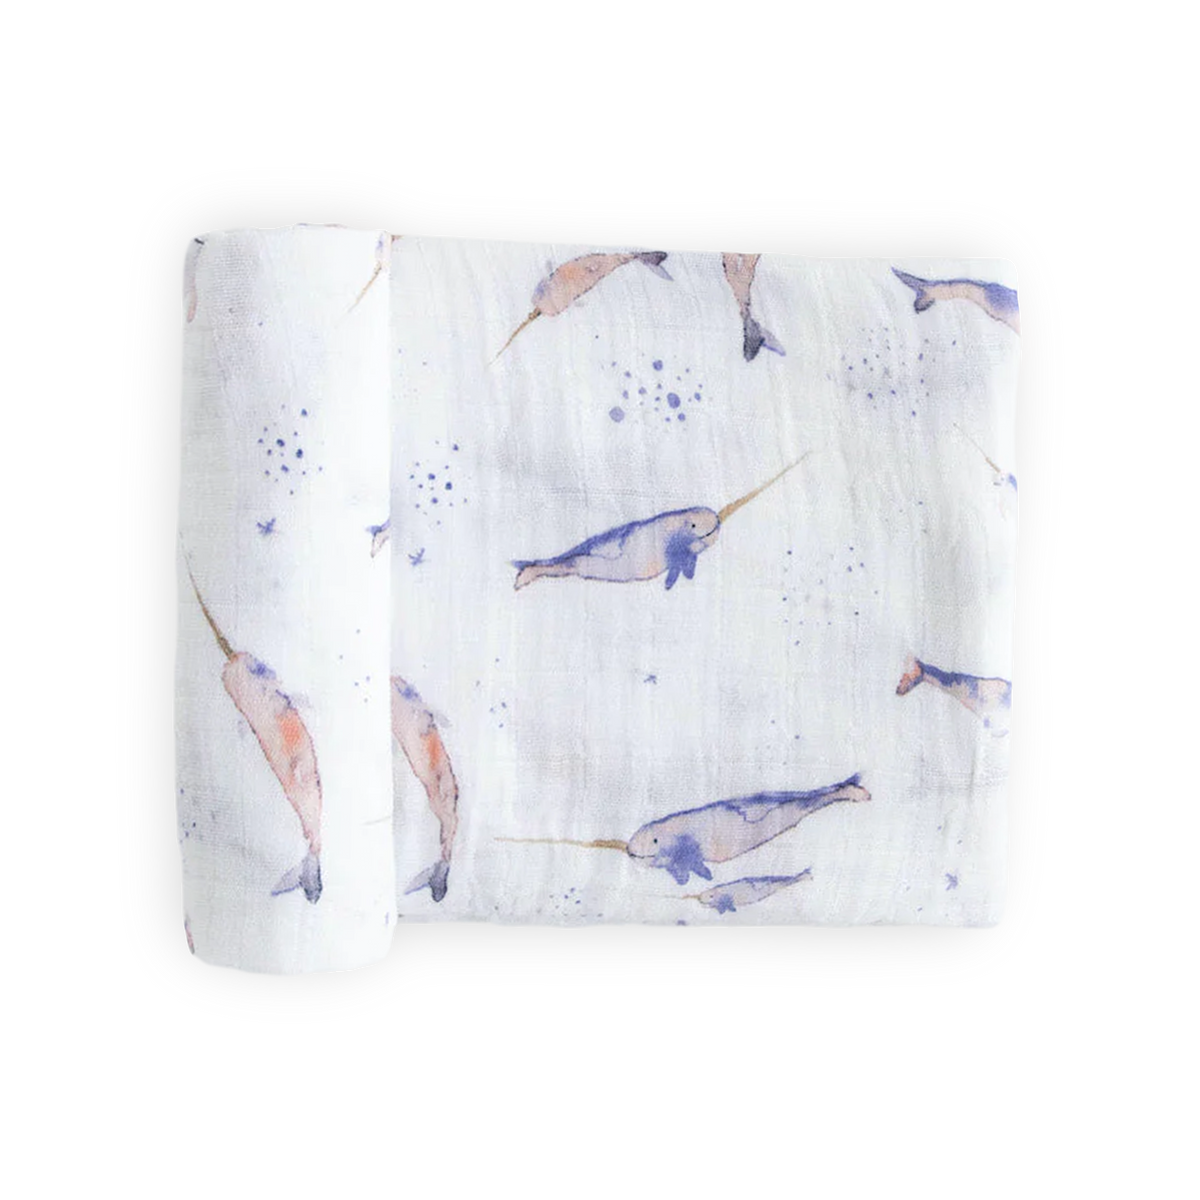 Little Unicorn Cotton Muslin Swaddle - Narwhal